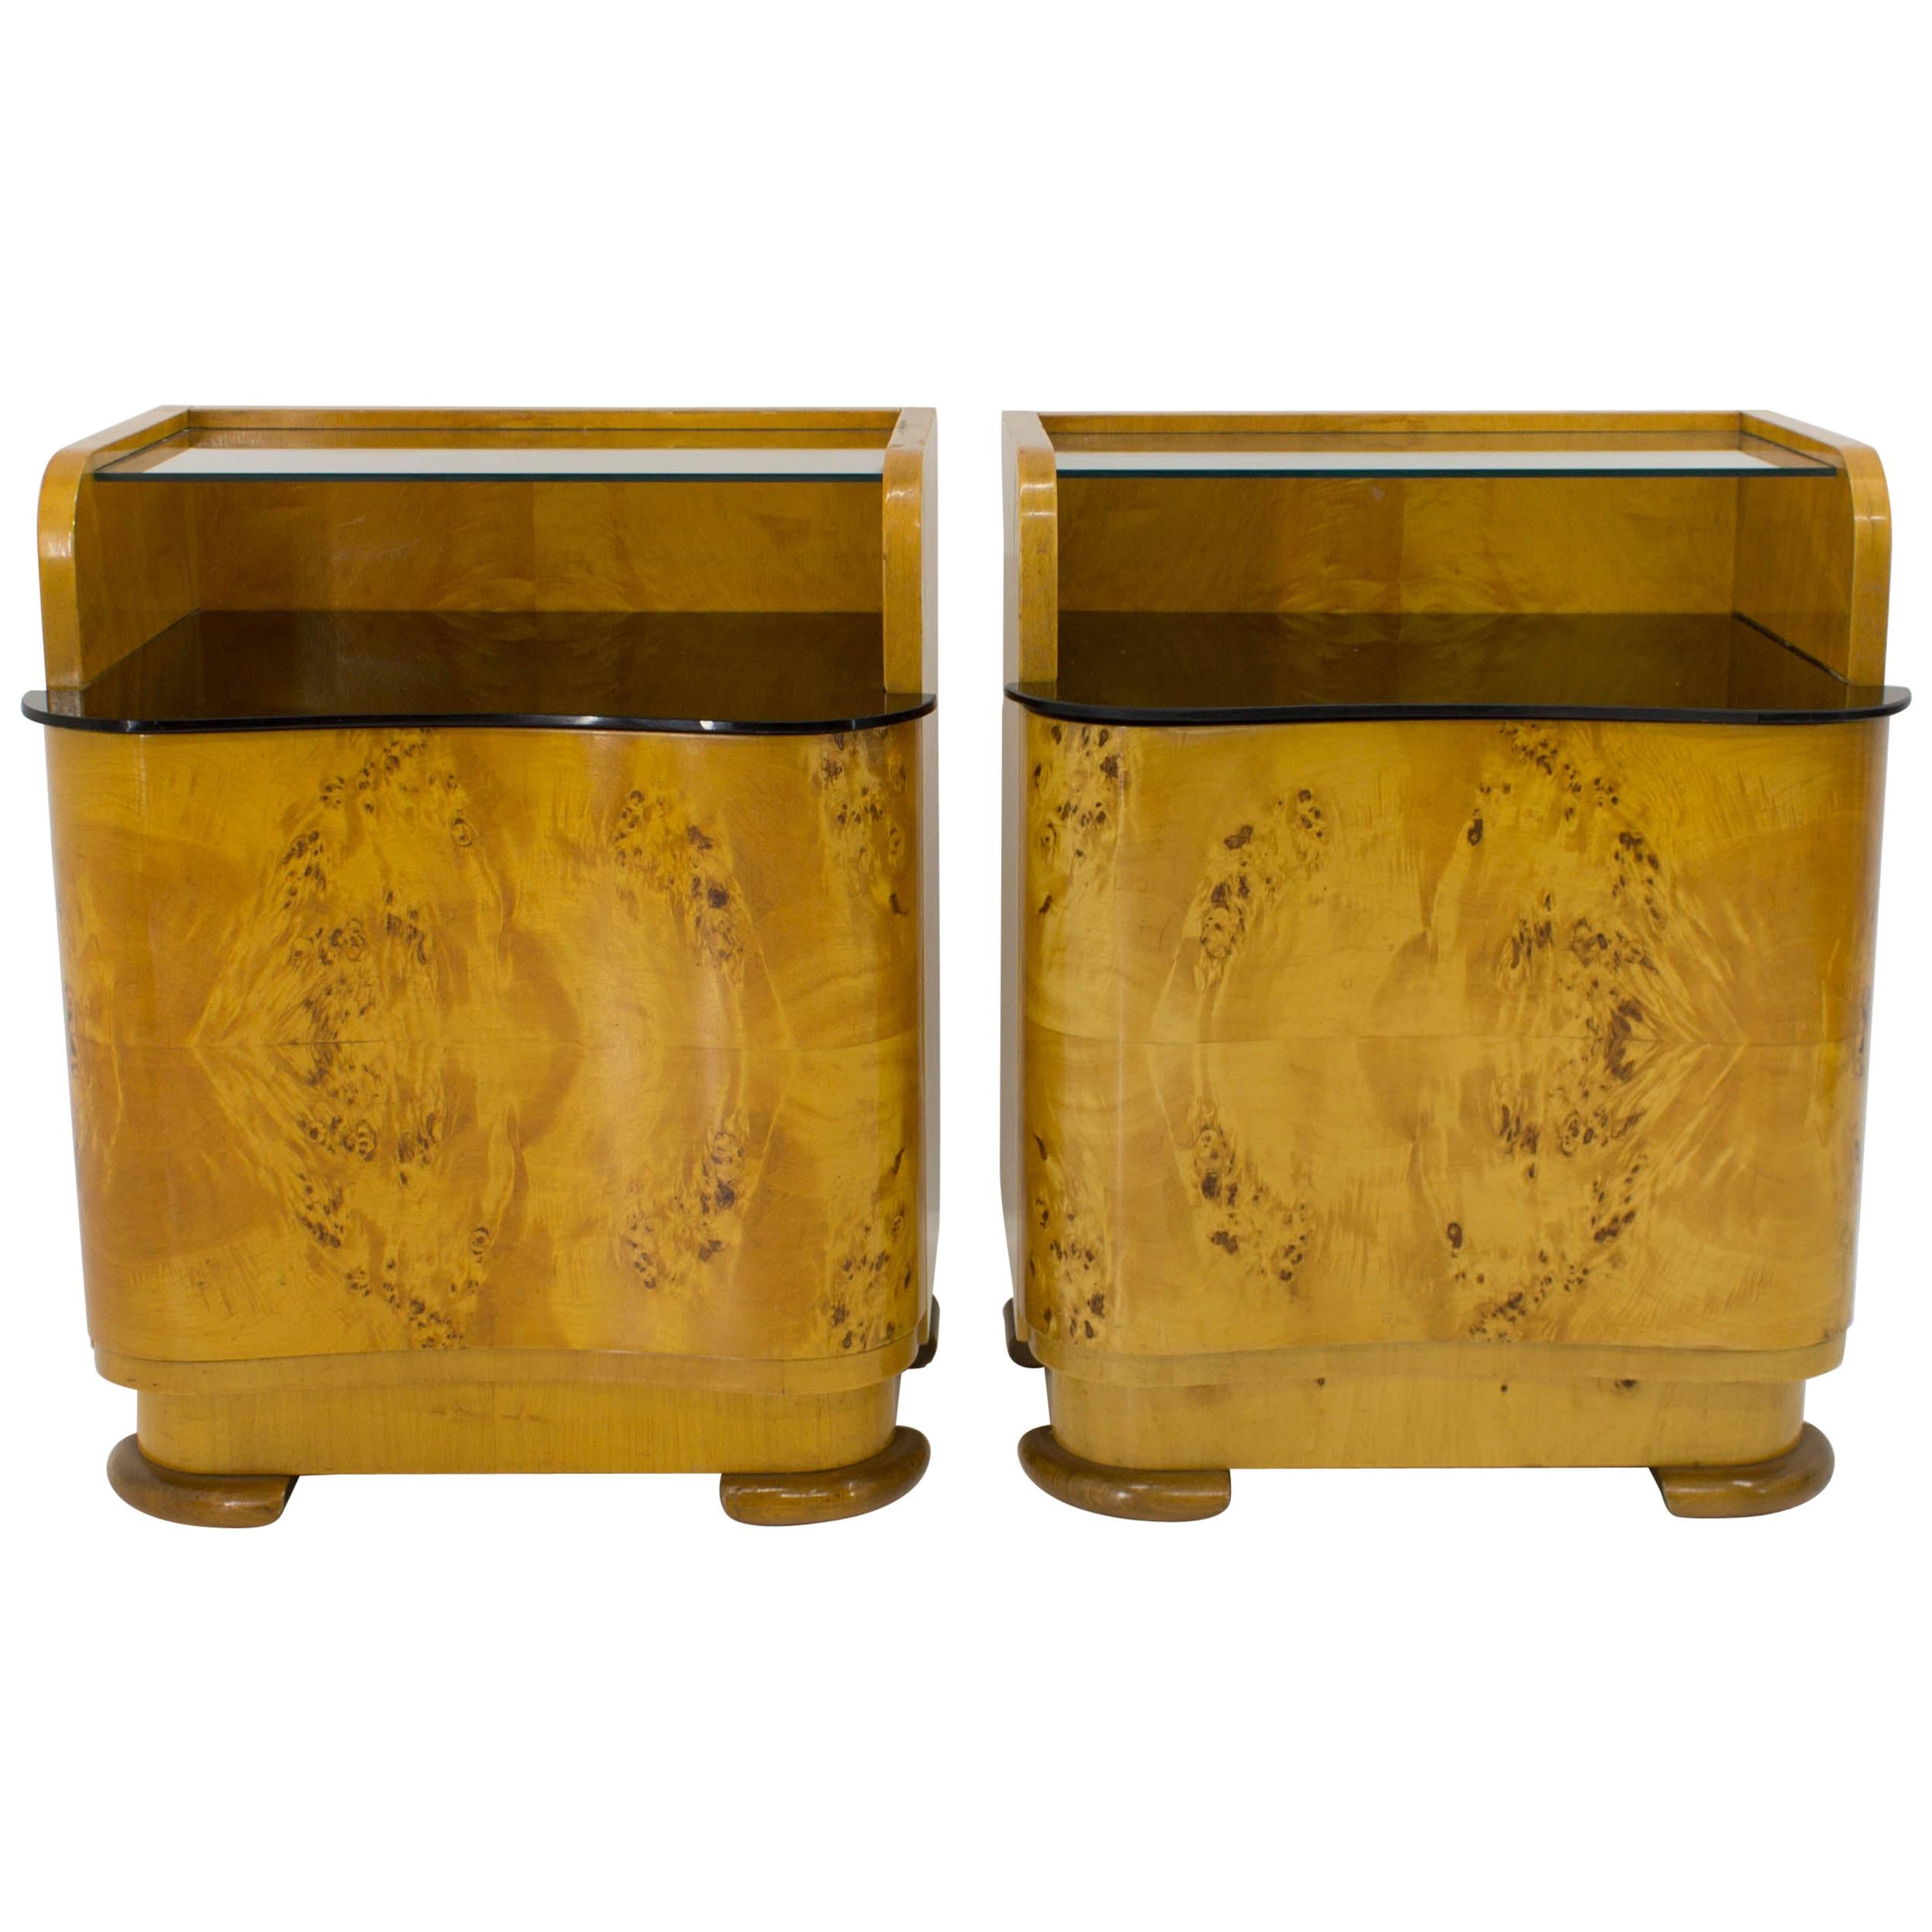 1940s Pair of Bedside Tables by Halabala for UP Zavody, Czechoslovakia